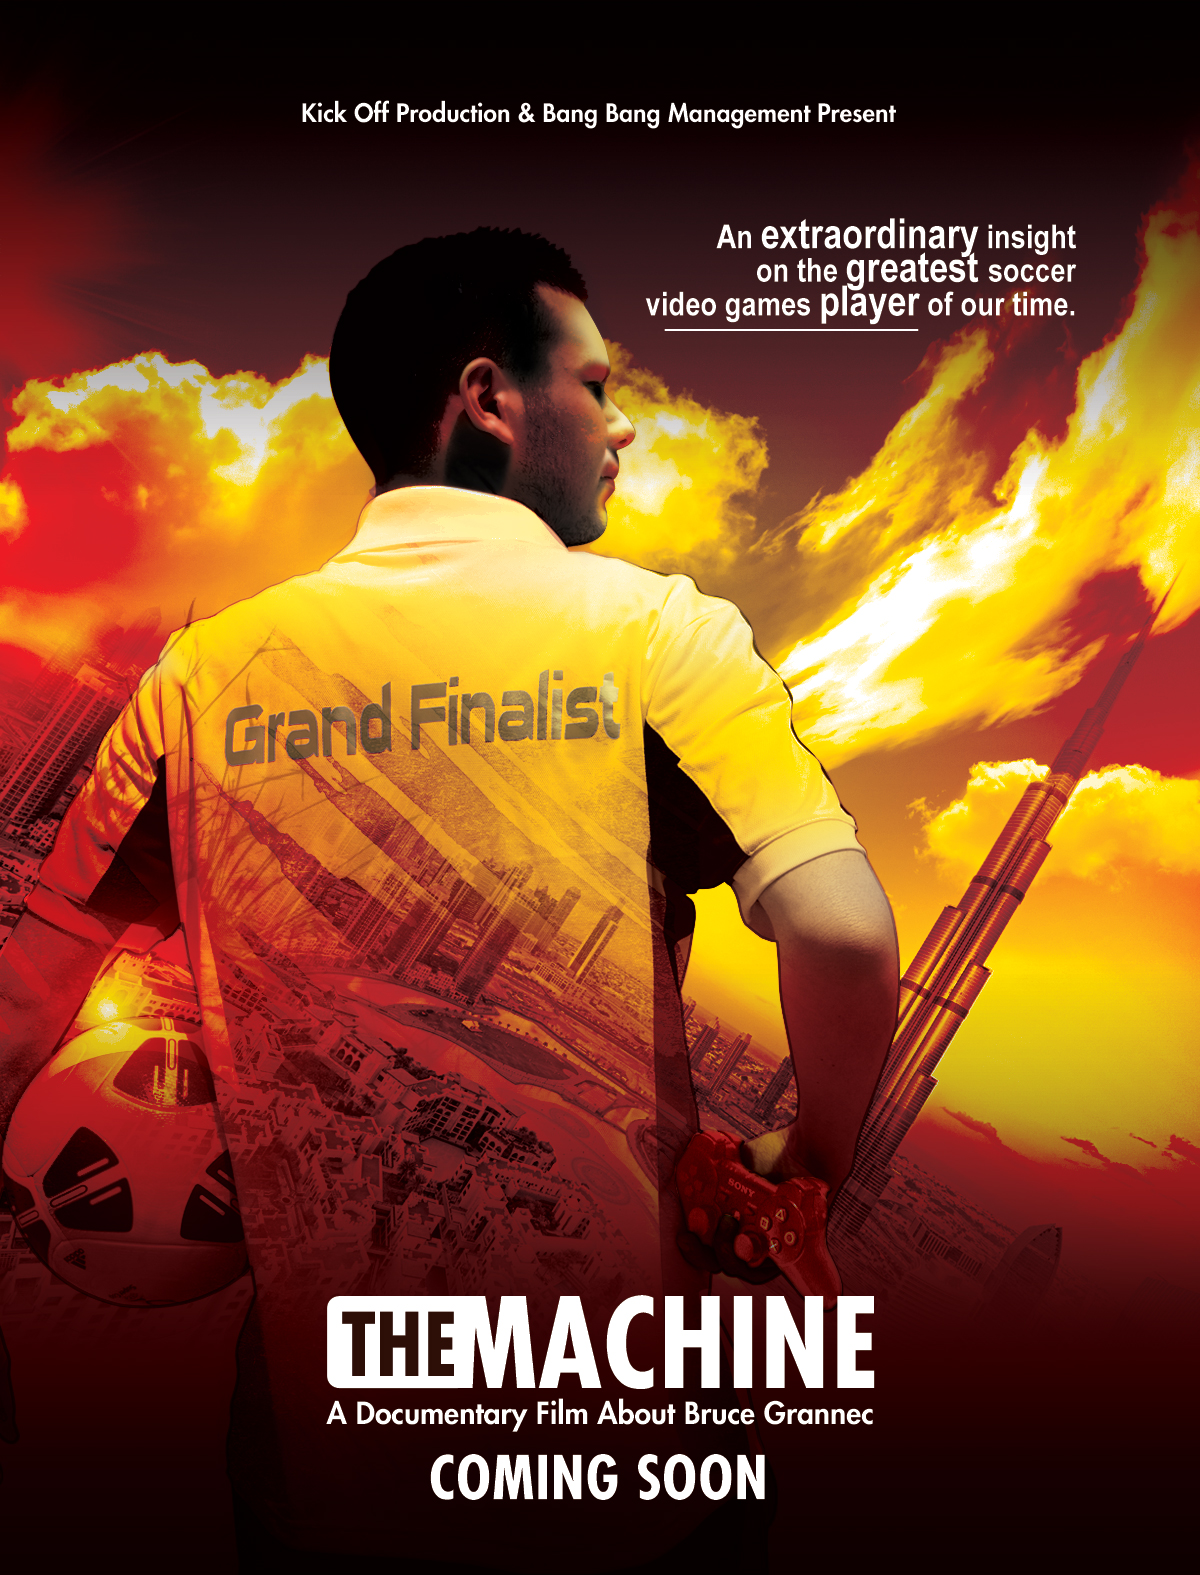 The Machine - A Documentary Film About Bruce Grannec